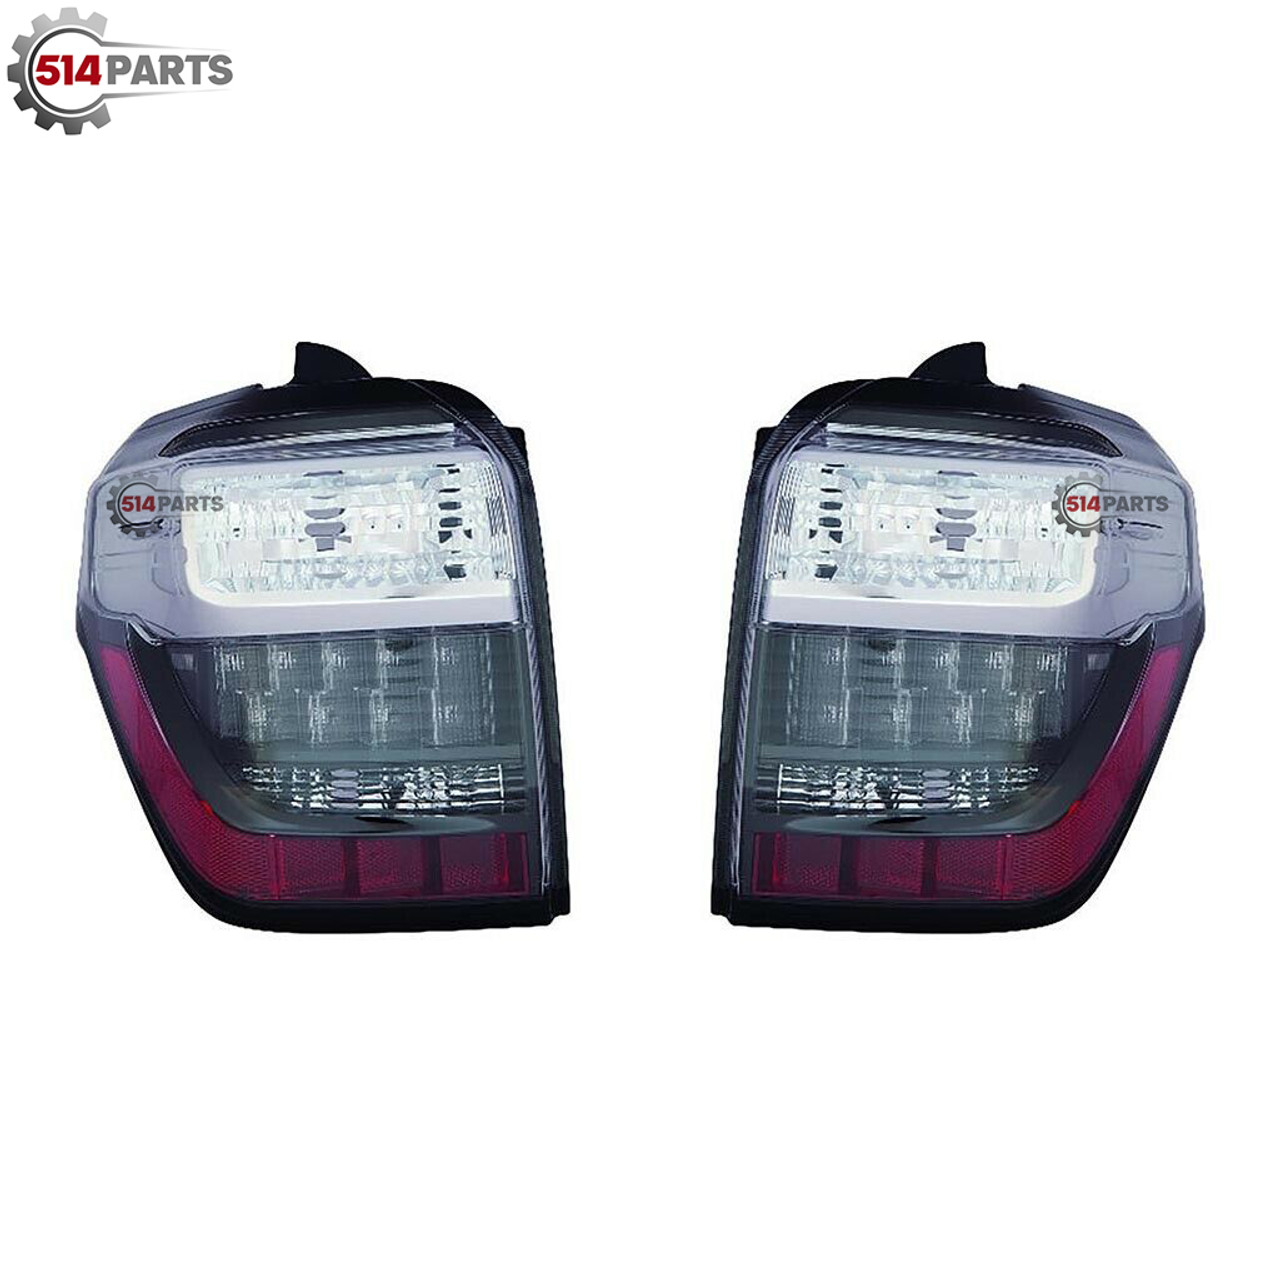 2014 - 2019 TOYOTA 4Runner TAIL LIGHTS High Quality - PHARES ARRIERE Haute Qualite